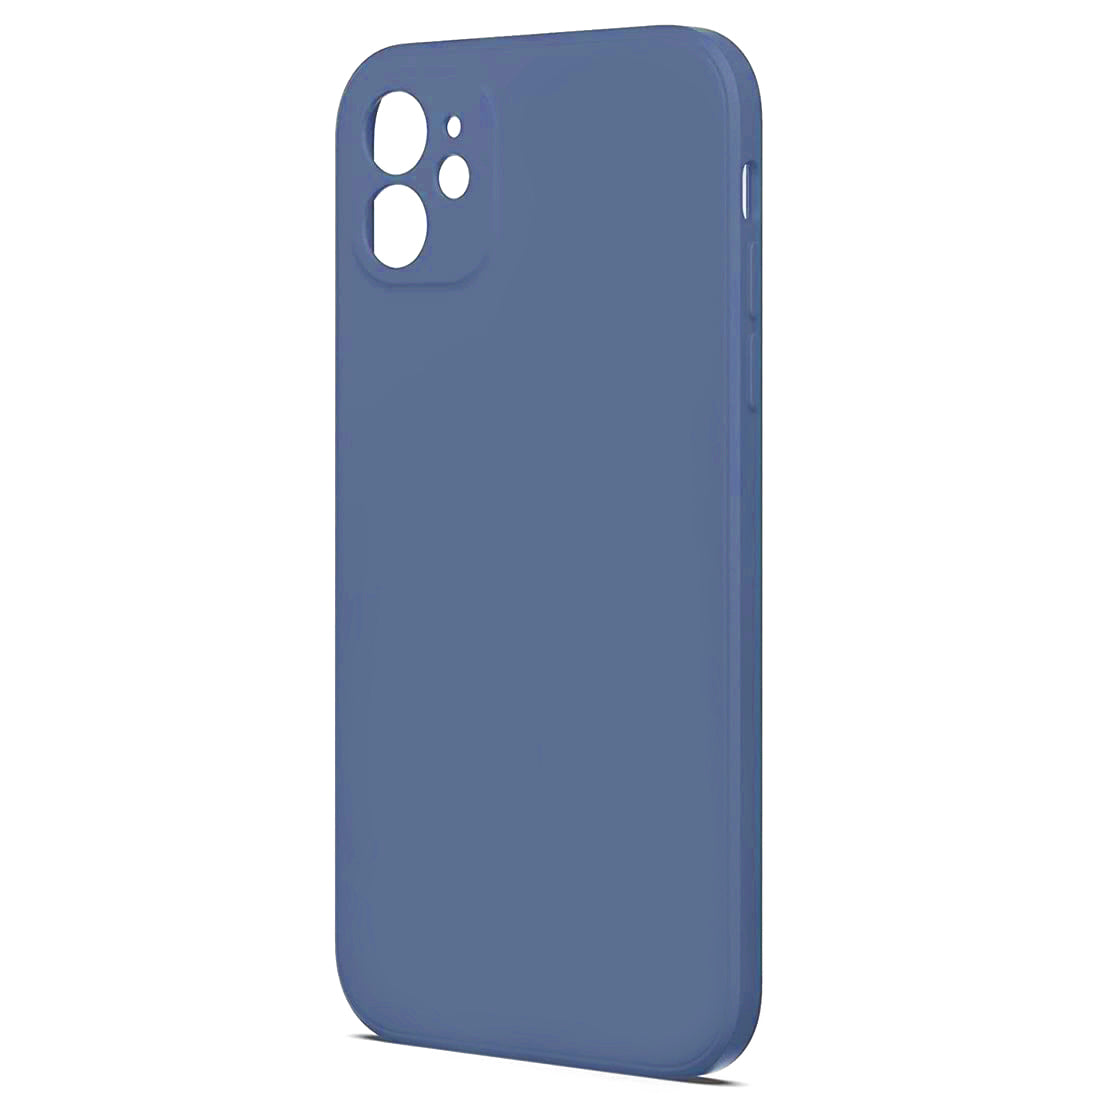 Shockproof Liquid Silicone Case for Apple iPhone 11